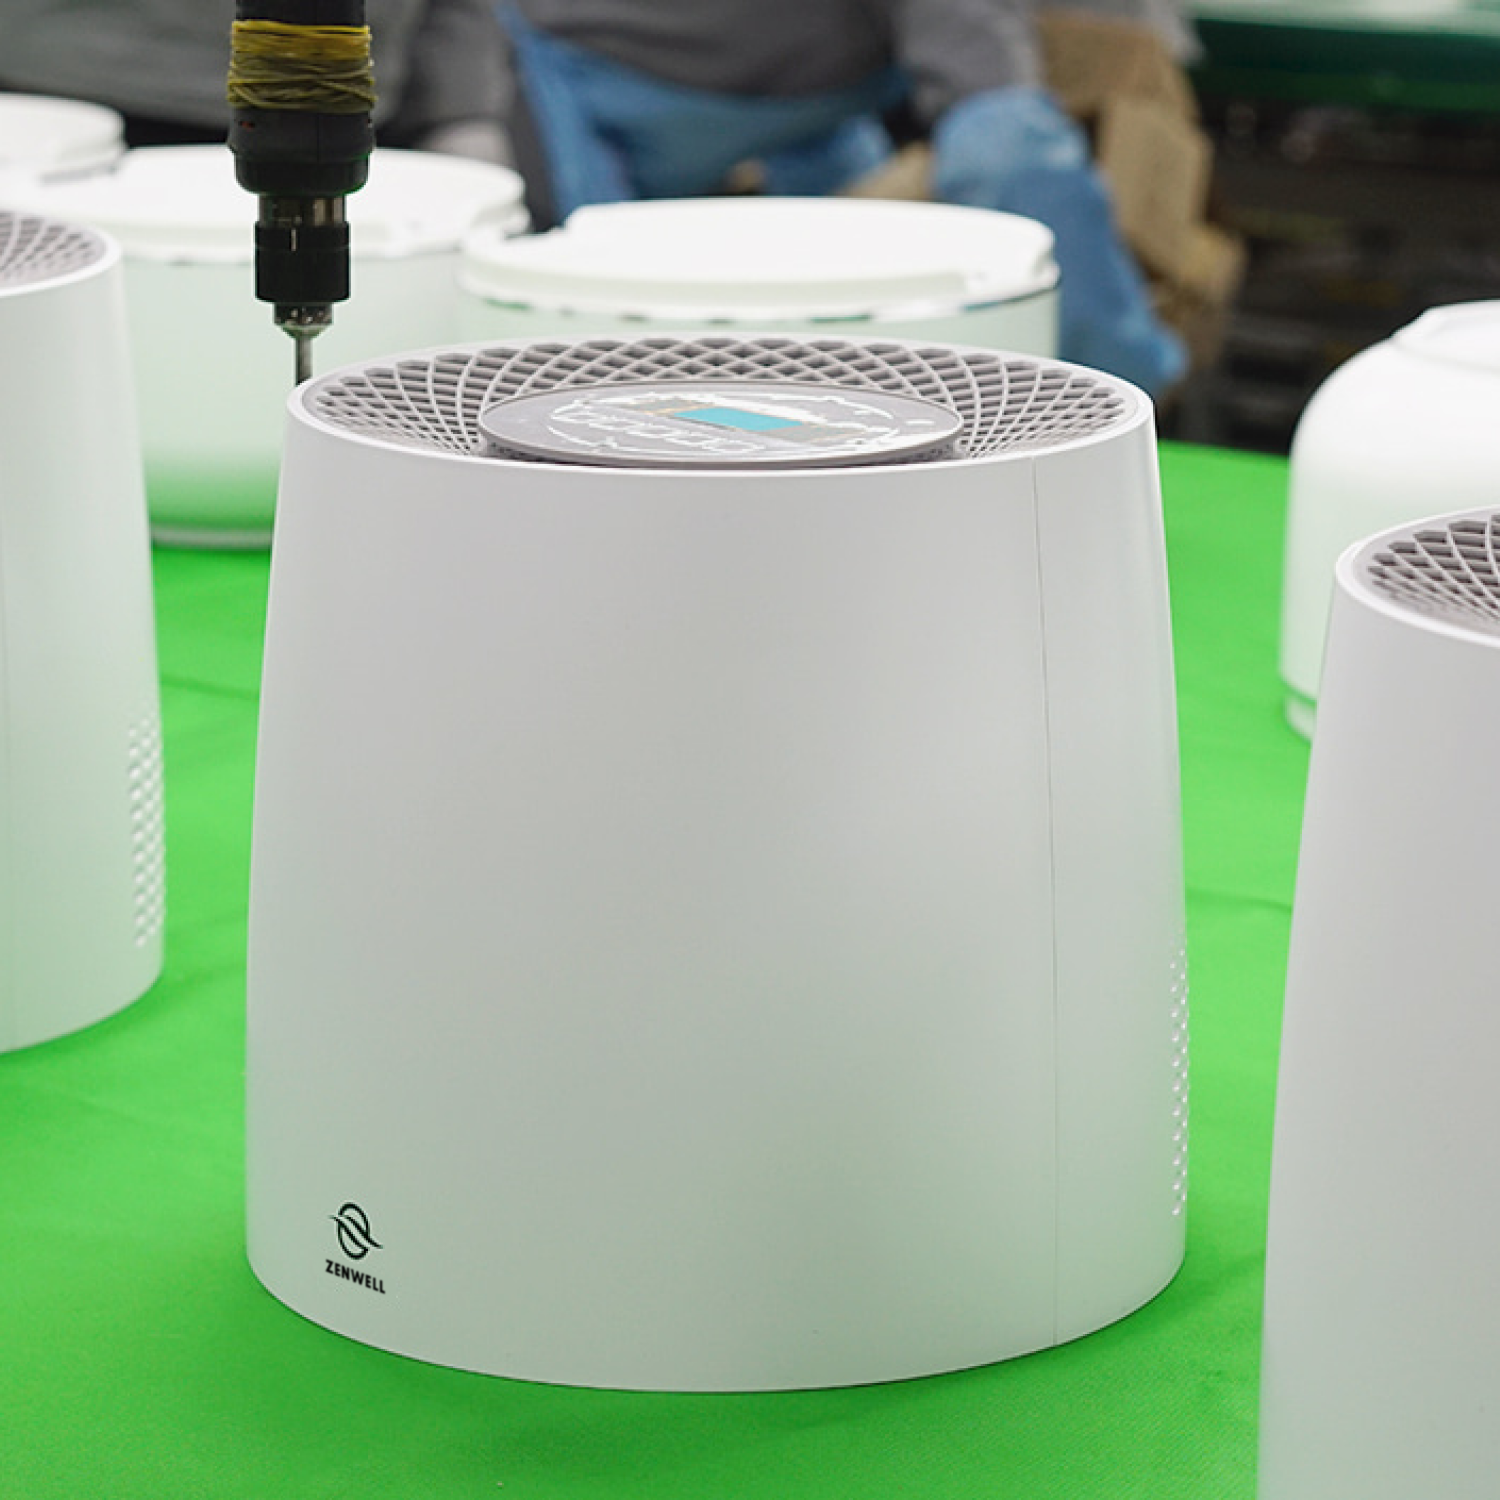 Top halves of Zenwell Humidifiers + Purifiers on production line